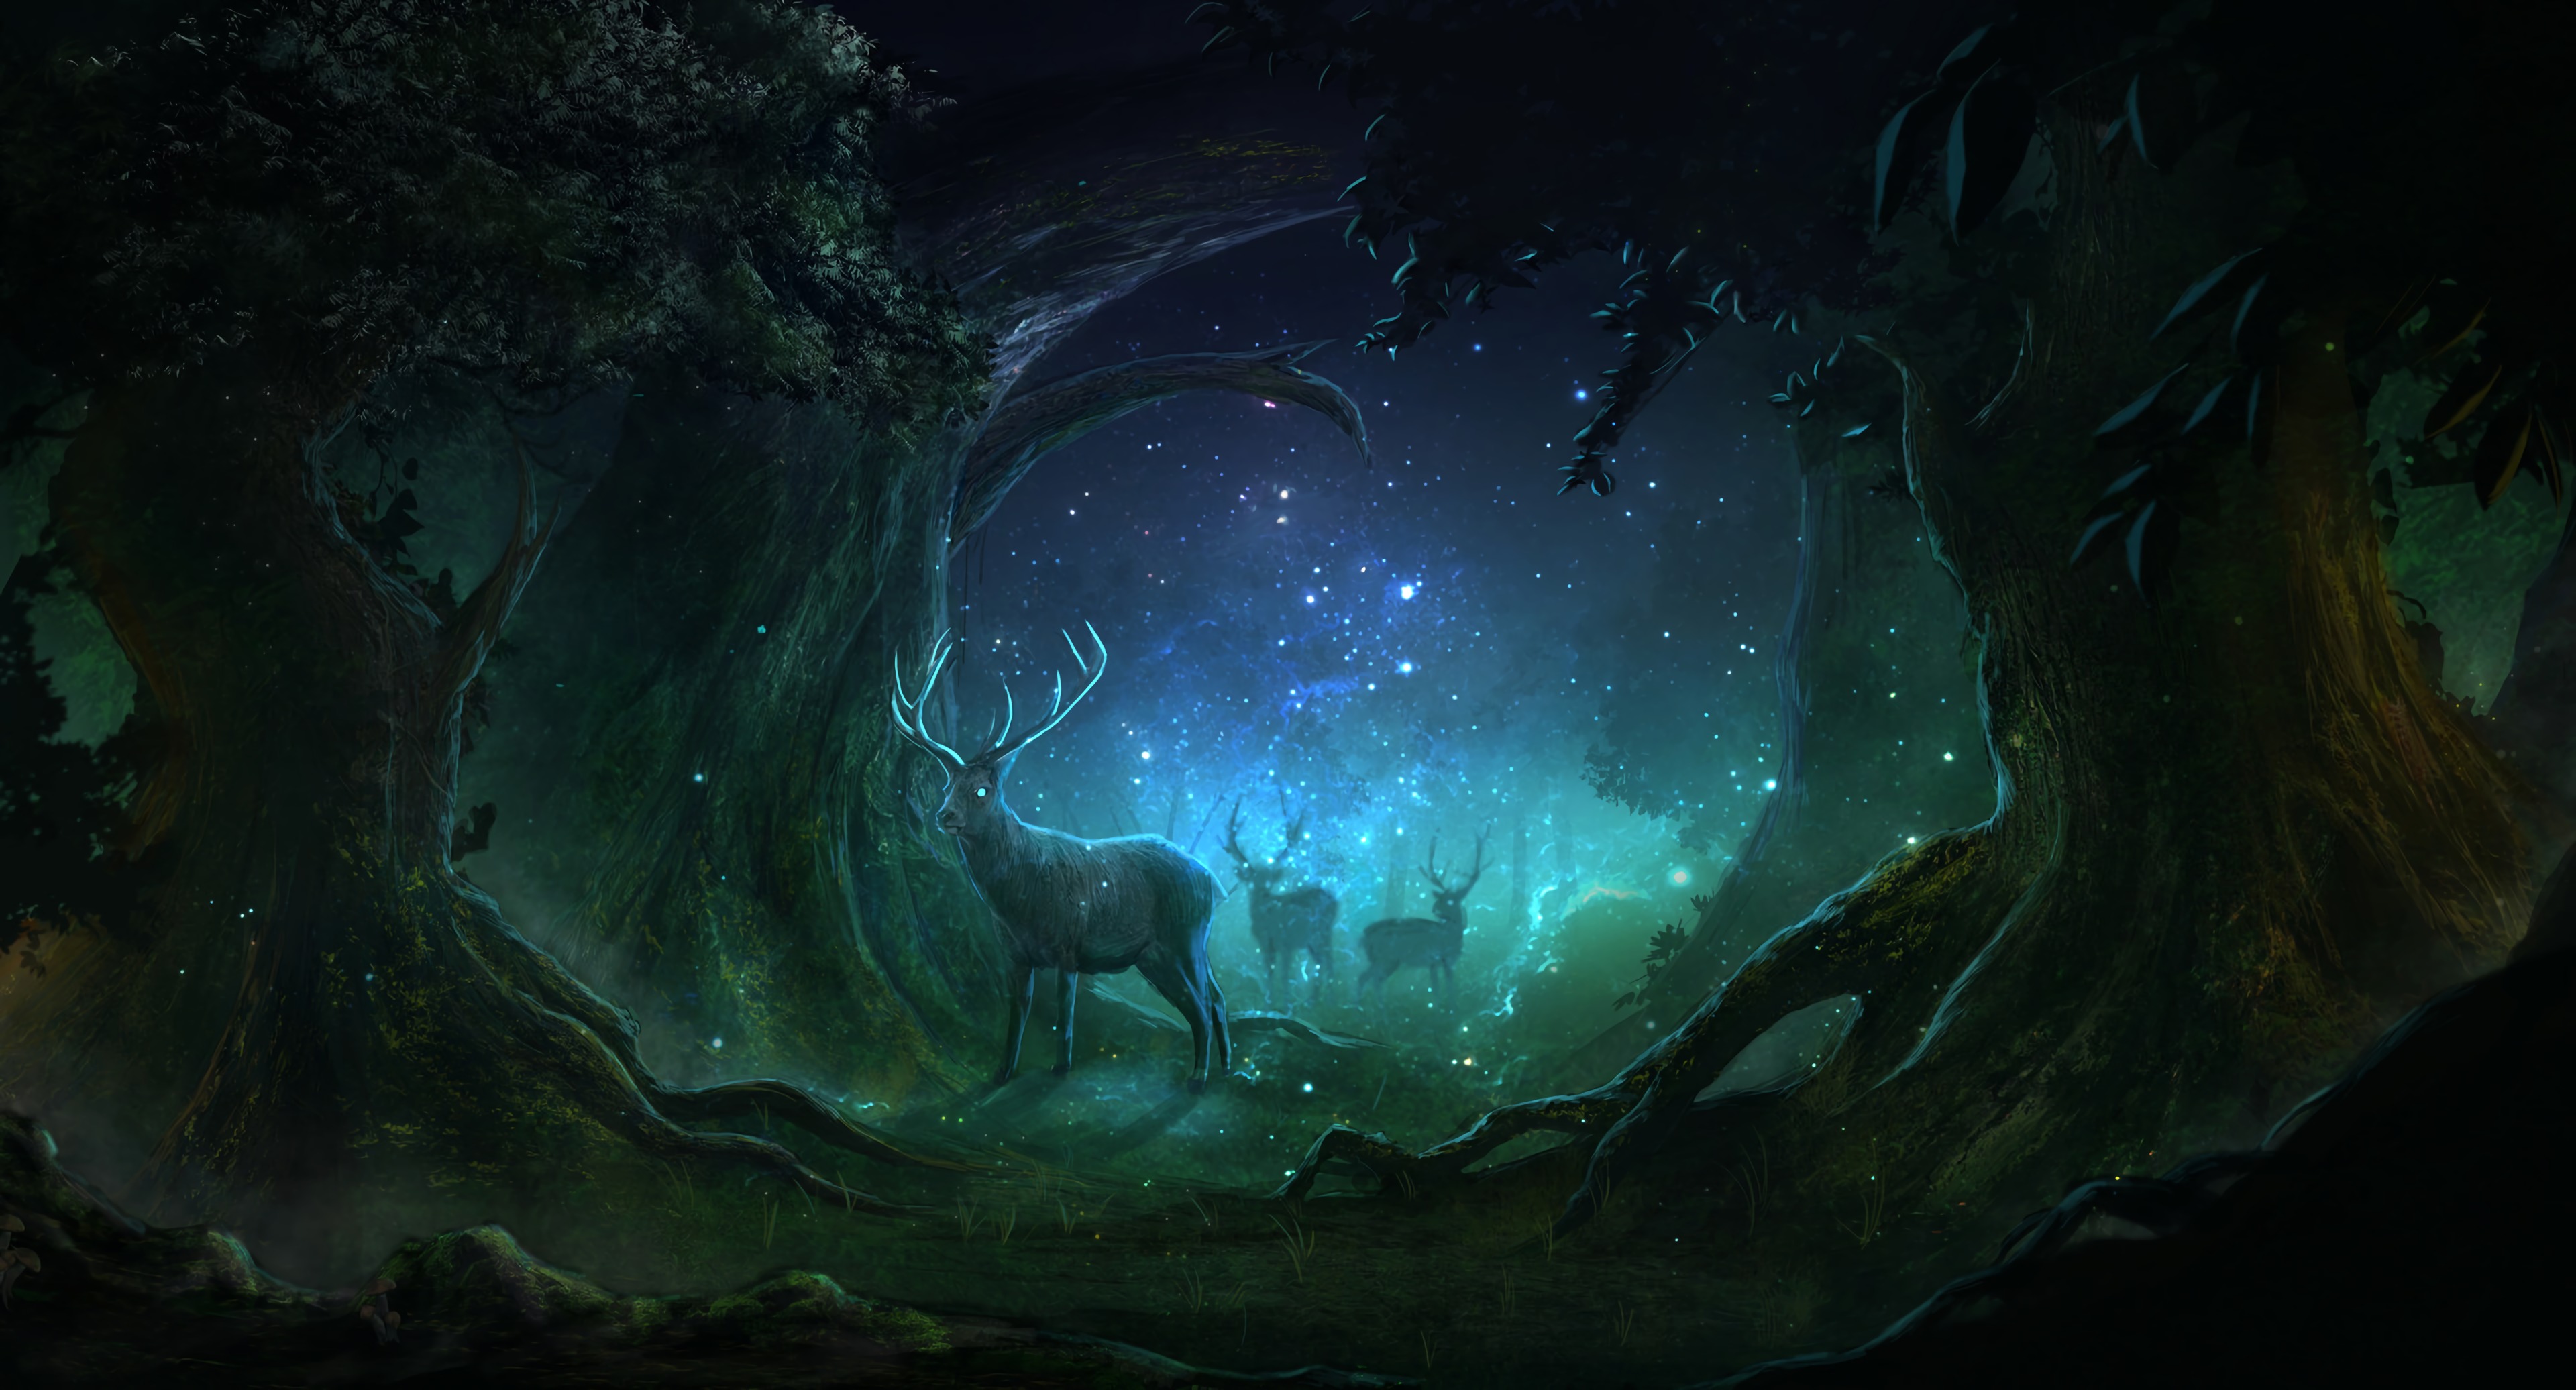 Cool Wallpapers magic, art, night, deers, lights, forest